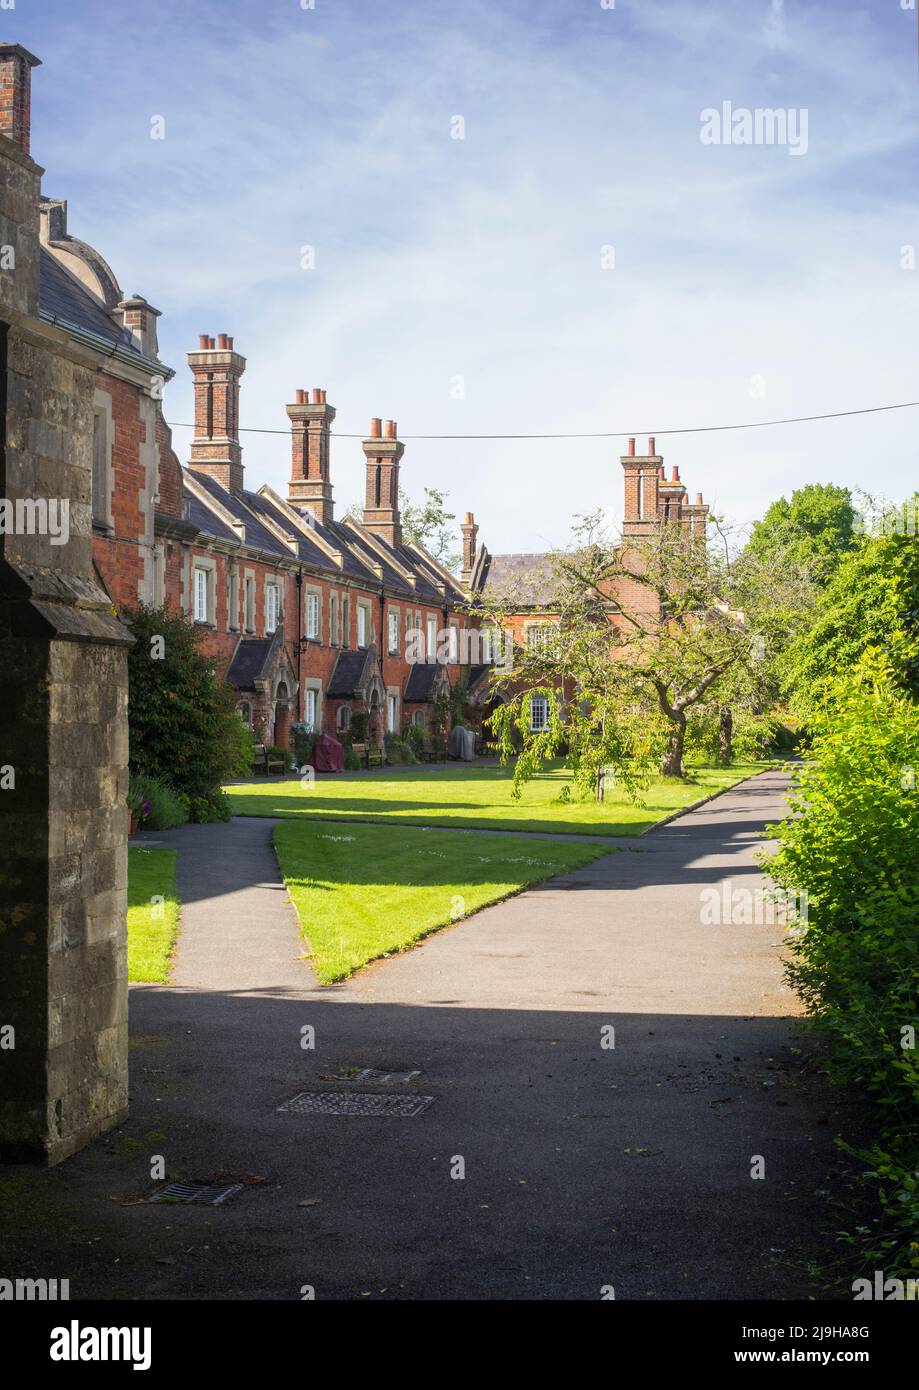 St John's Almshouses in Winchester, Hampshire, England Stock Photo